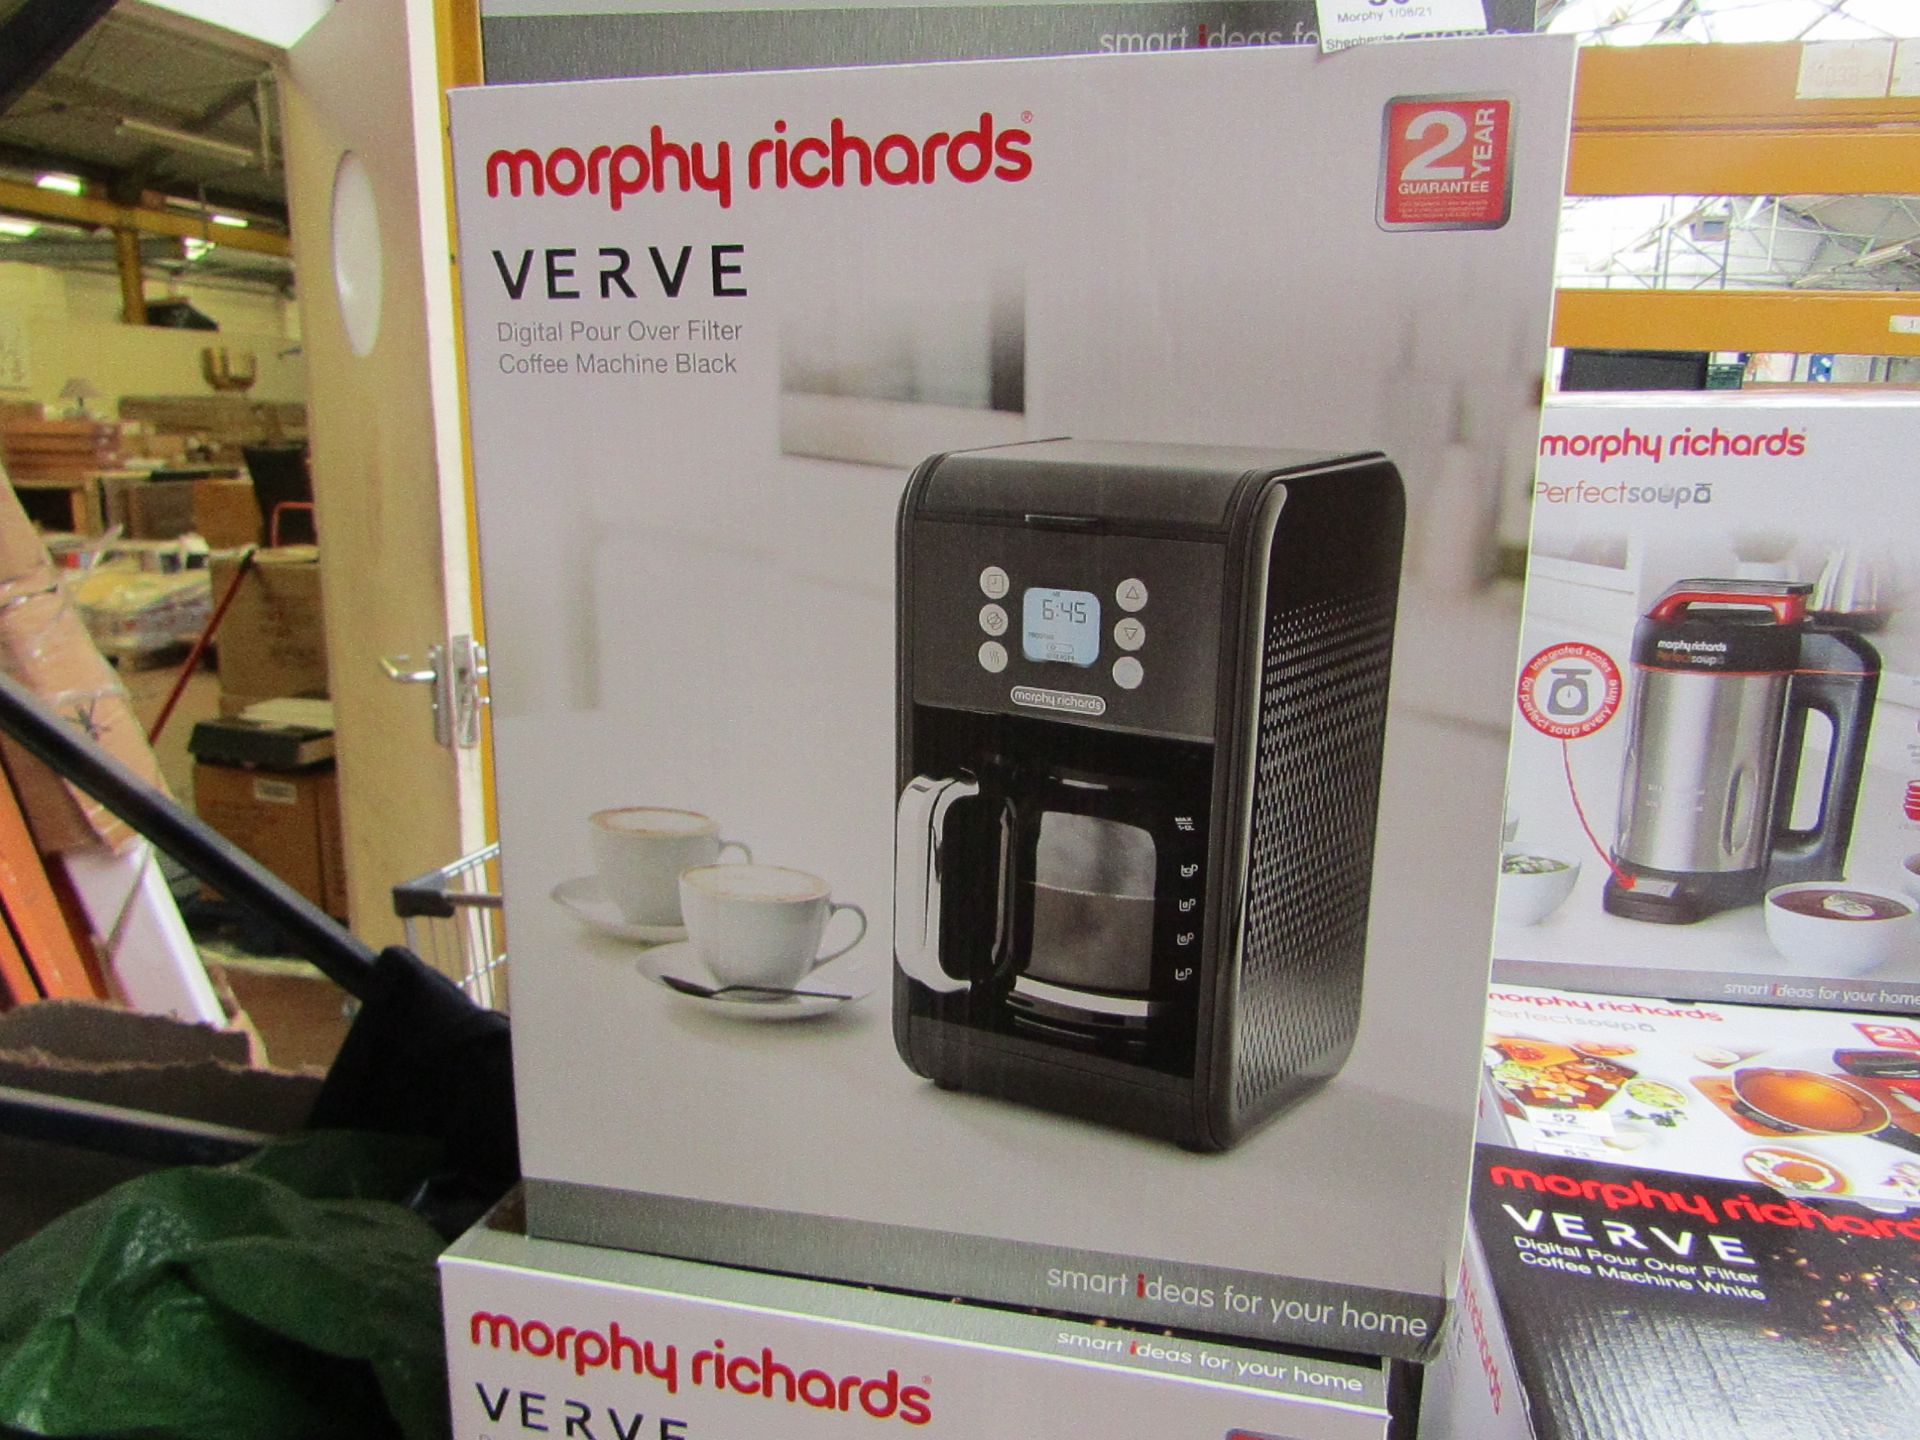 Morphy Richards Verve digital pour over filter coffee machine in black, brand new and boxed. RRP £